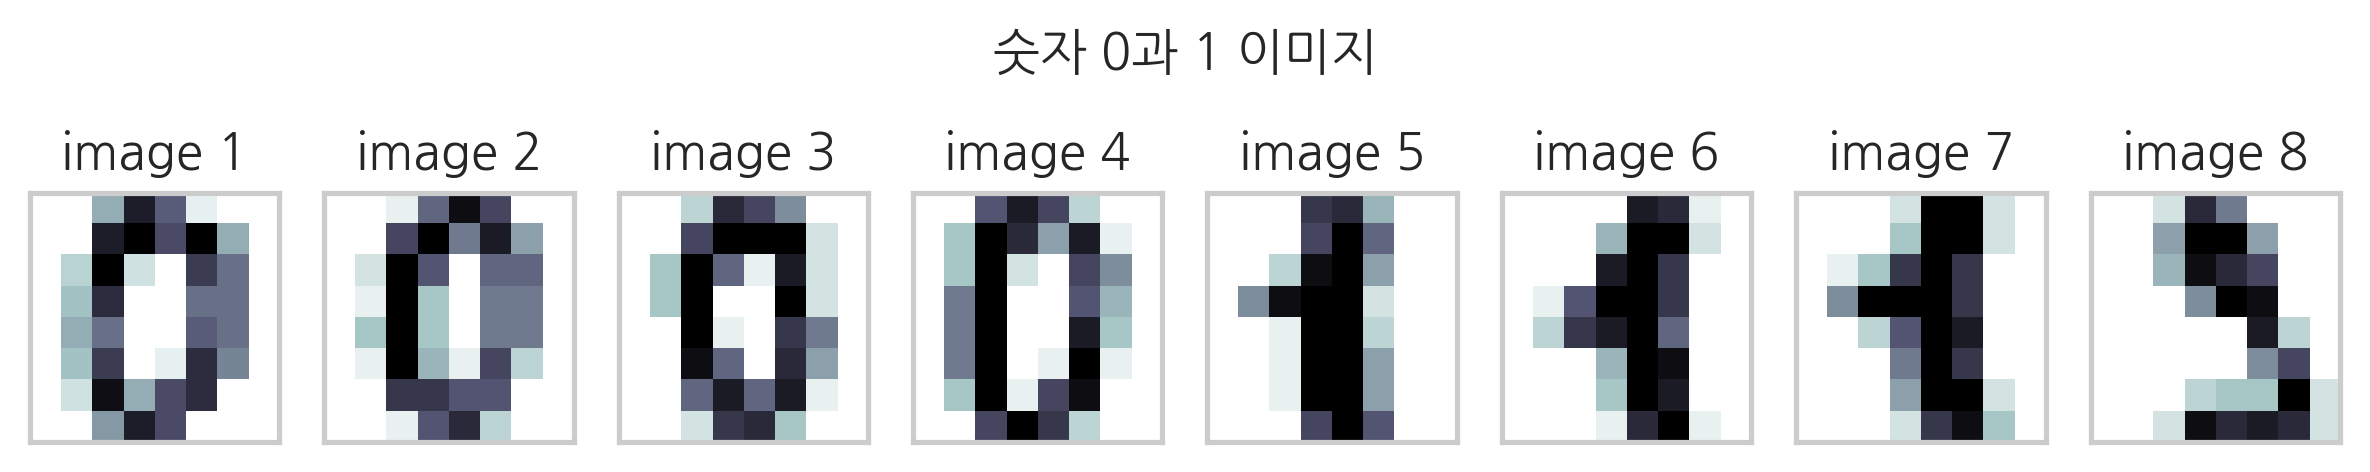 ../_images/02.01 데이터와 행렬_21_0.png